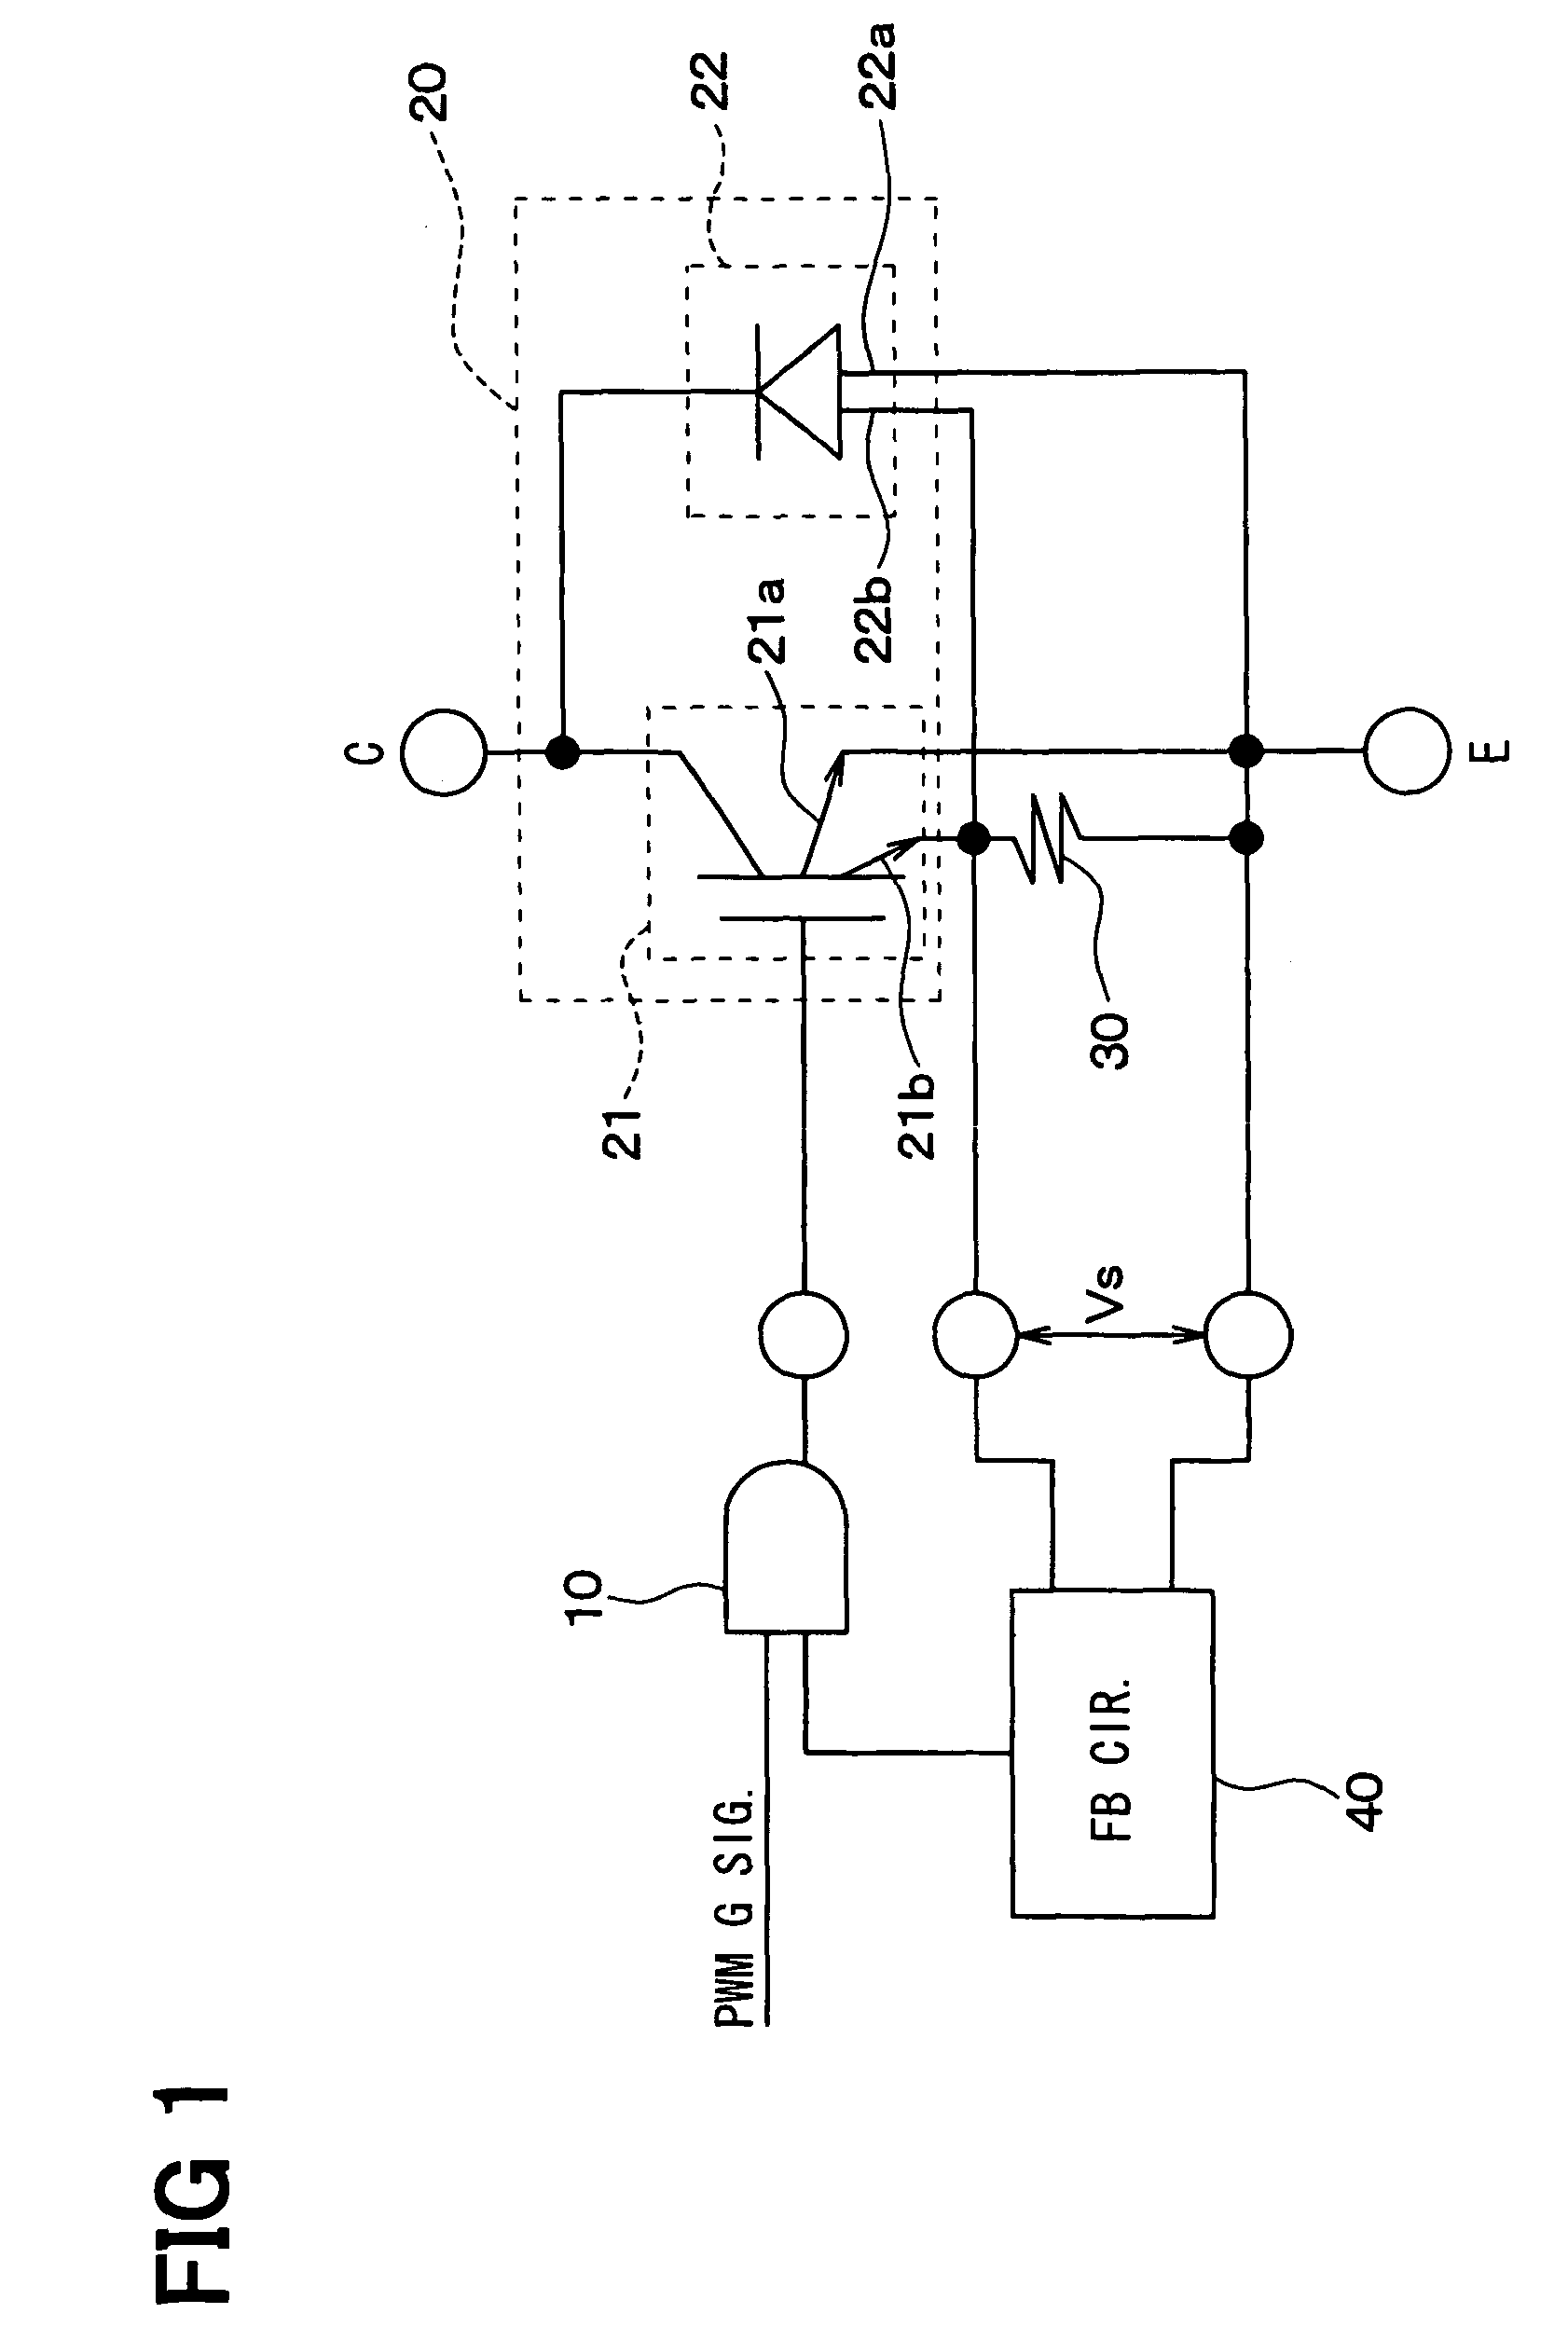 Semiconductor device having diode-built-in IGBT and semiconductor device having diode-built-in DMOS